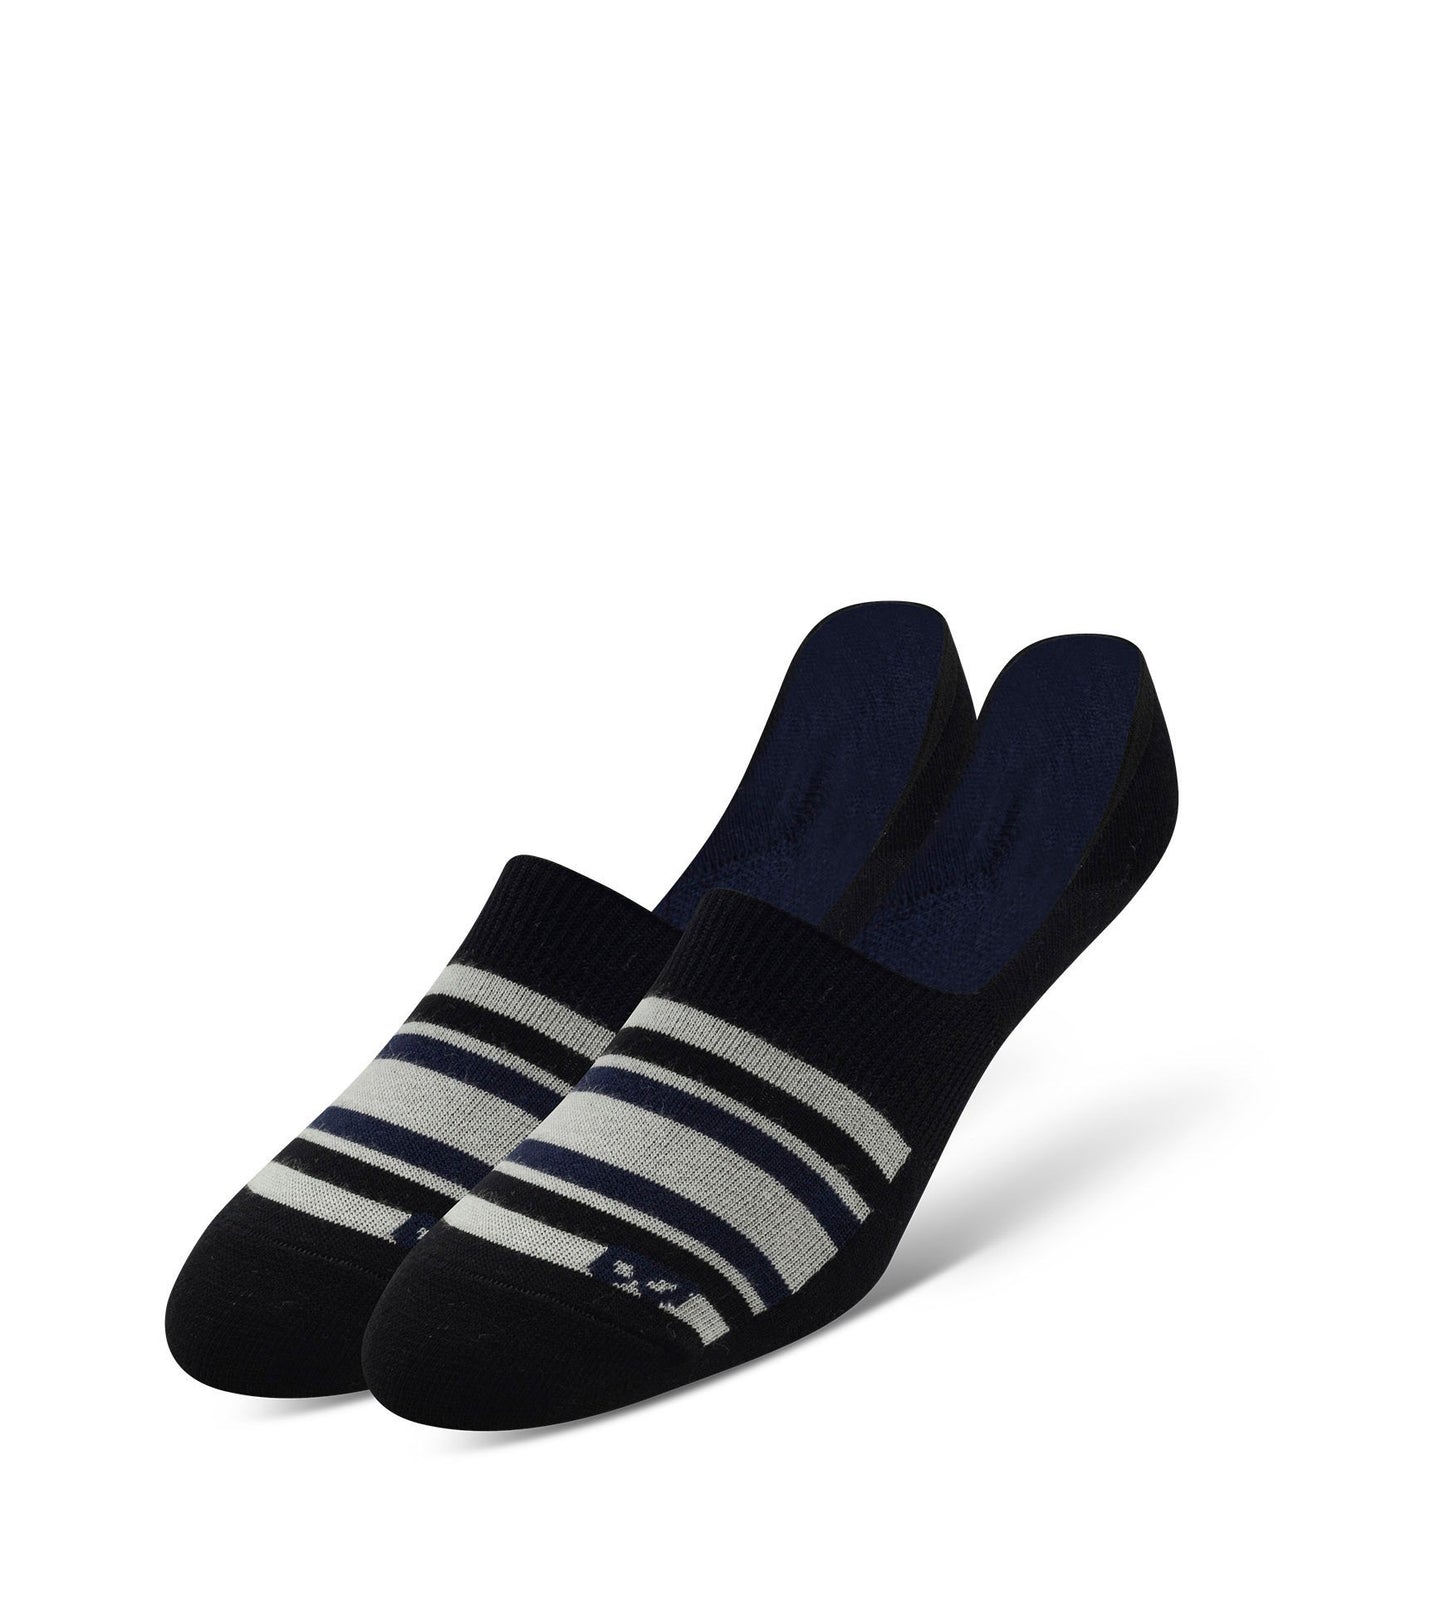 No Show Socks 3 Pack navy and light grey stripes